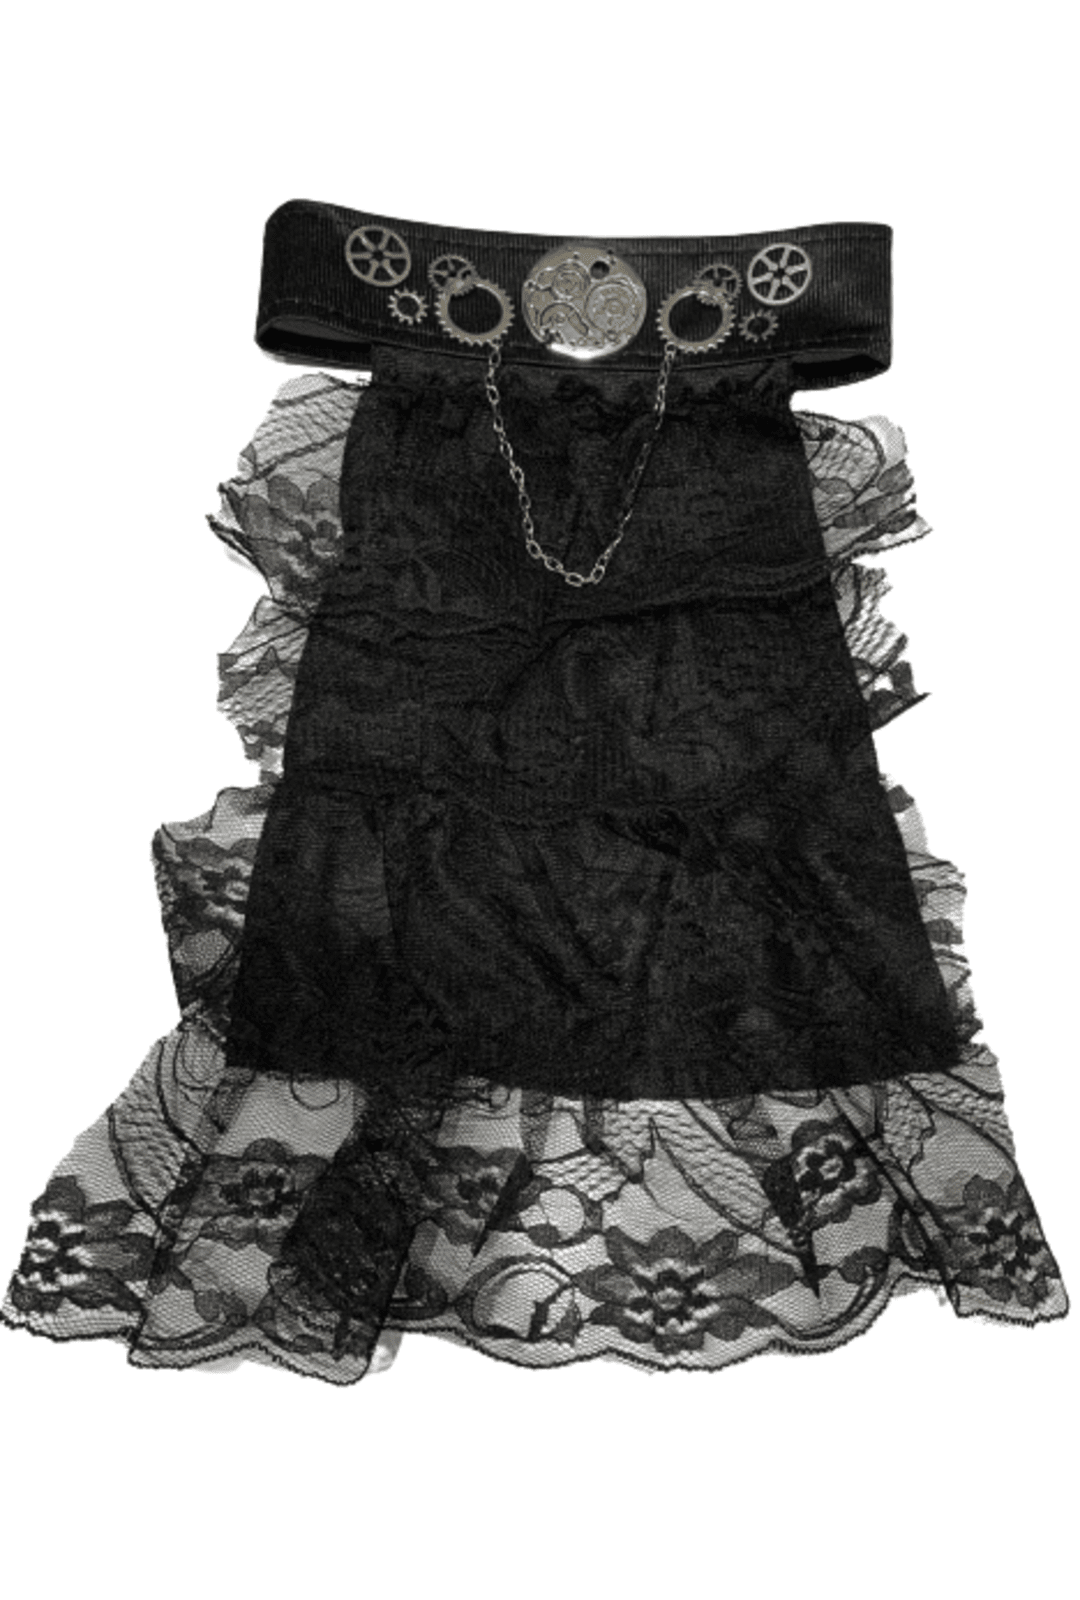 Black Steampunk Jabot Collar with Silver Cogs